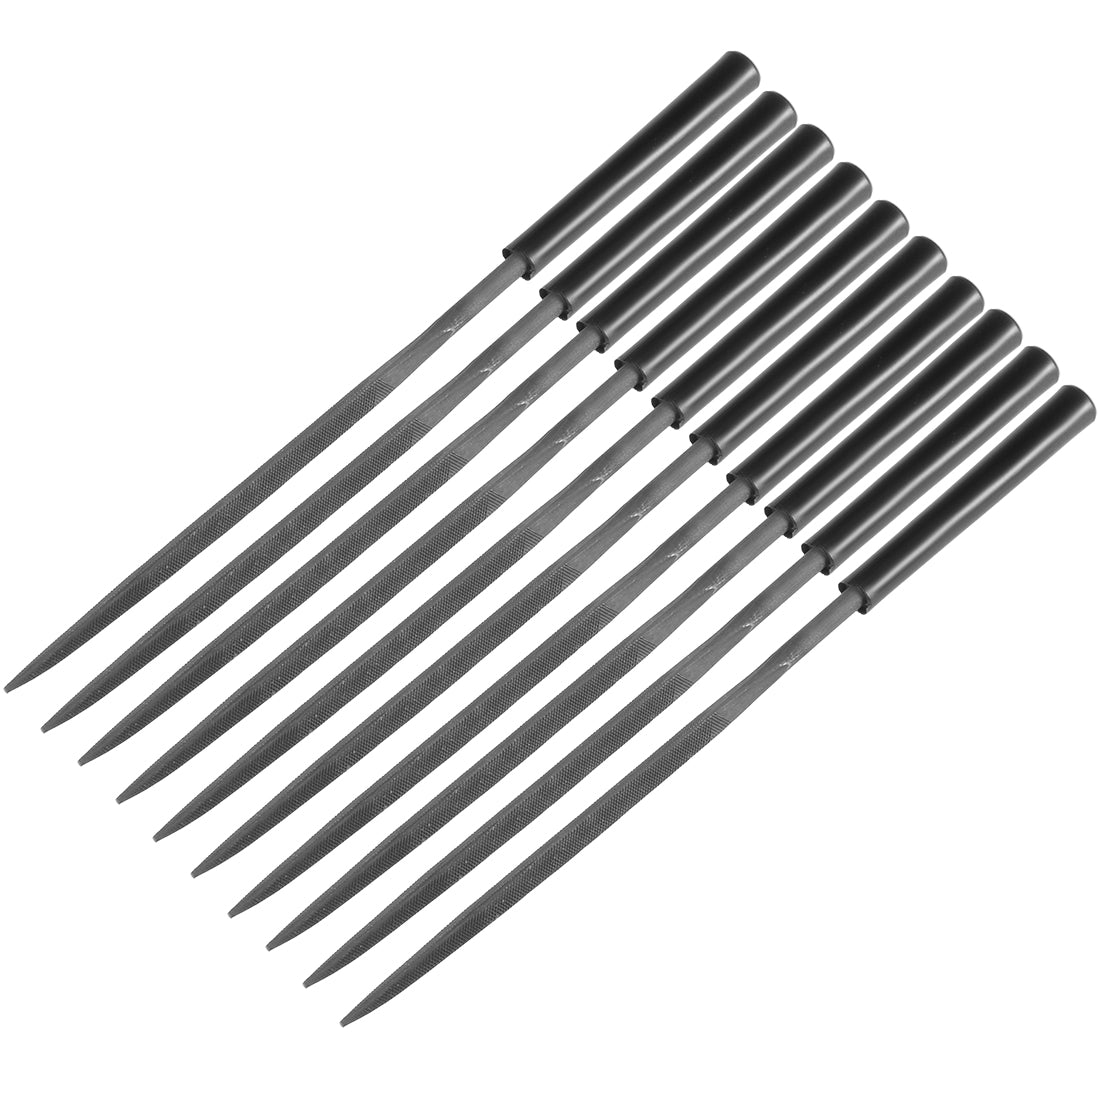 uxcell Uxcell 10Pcs Second Cut Steel Triangular Needle File with Plastic Handle, 4mm x 160mm